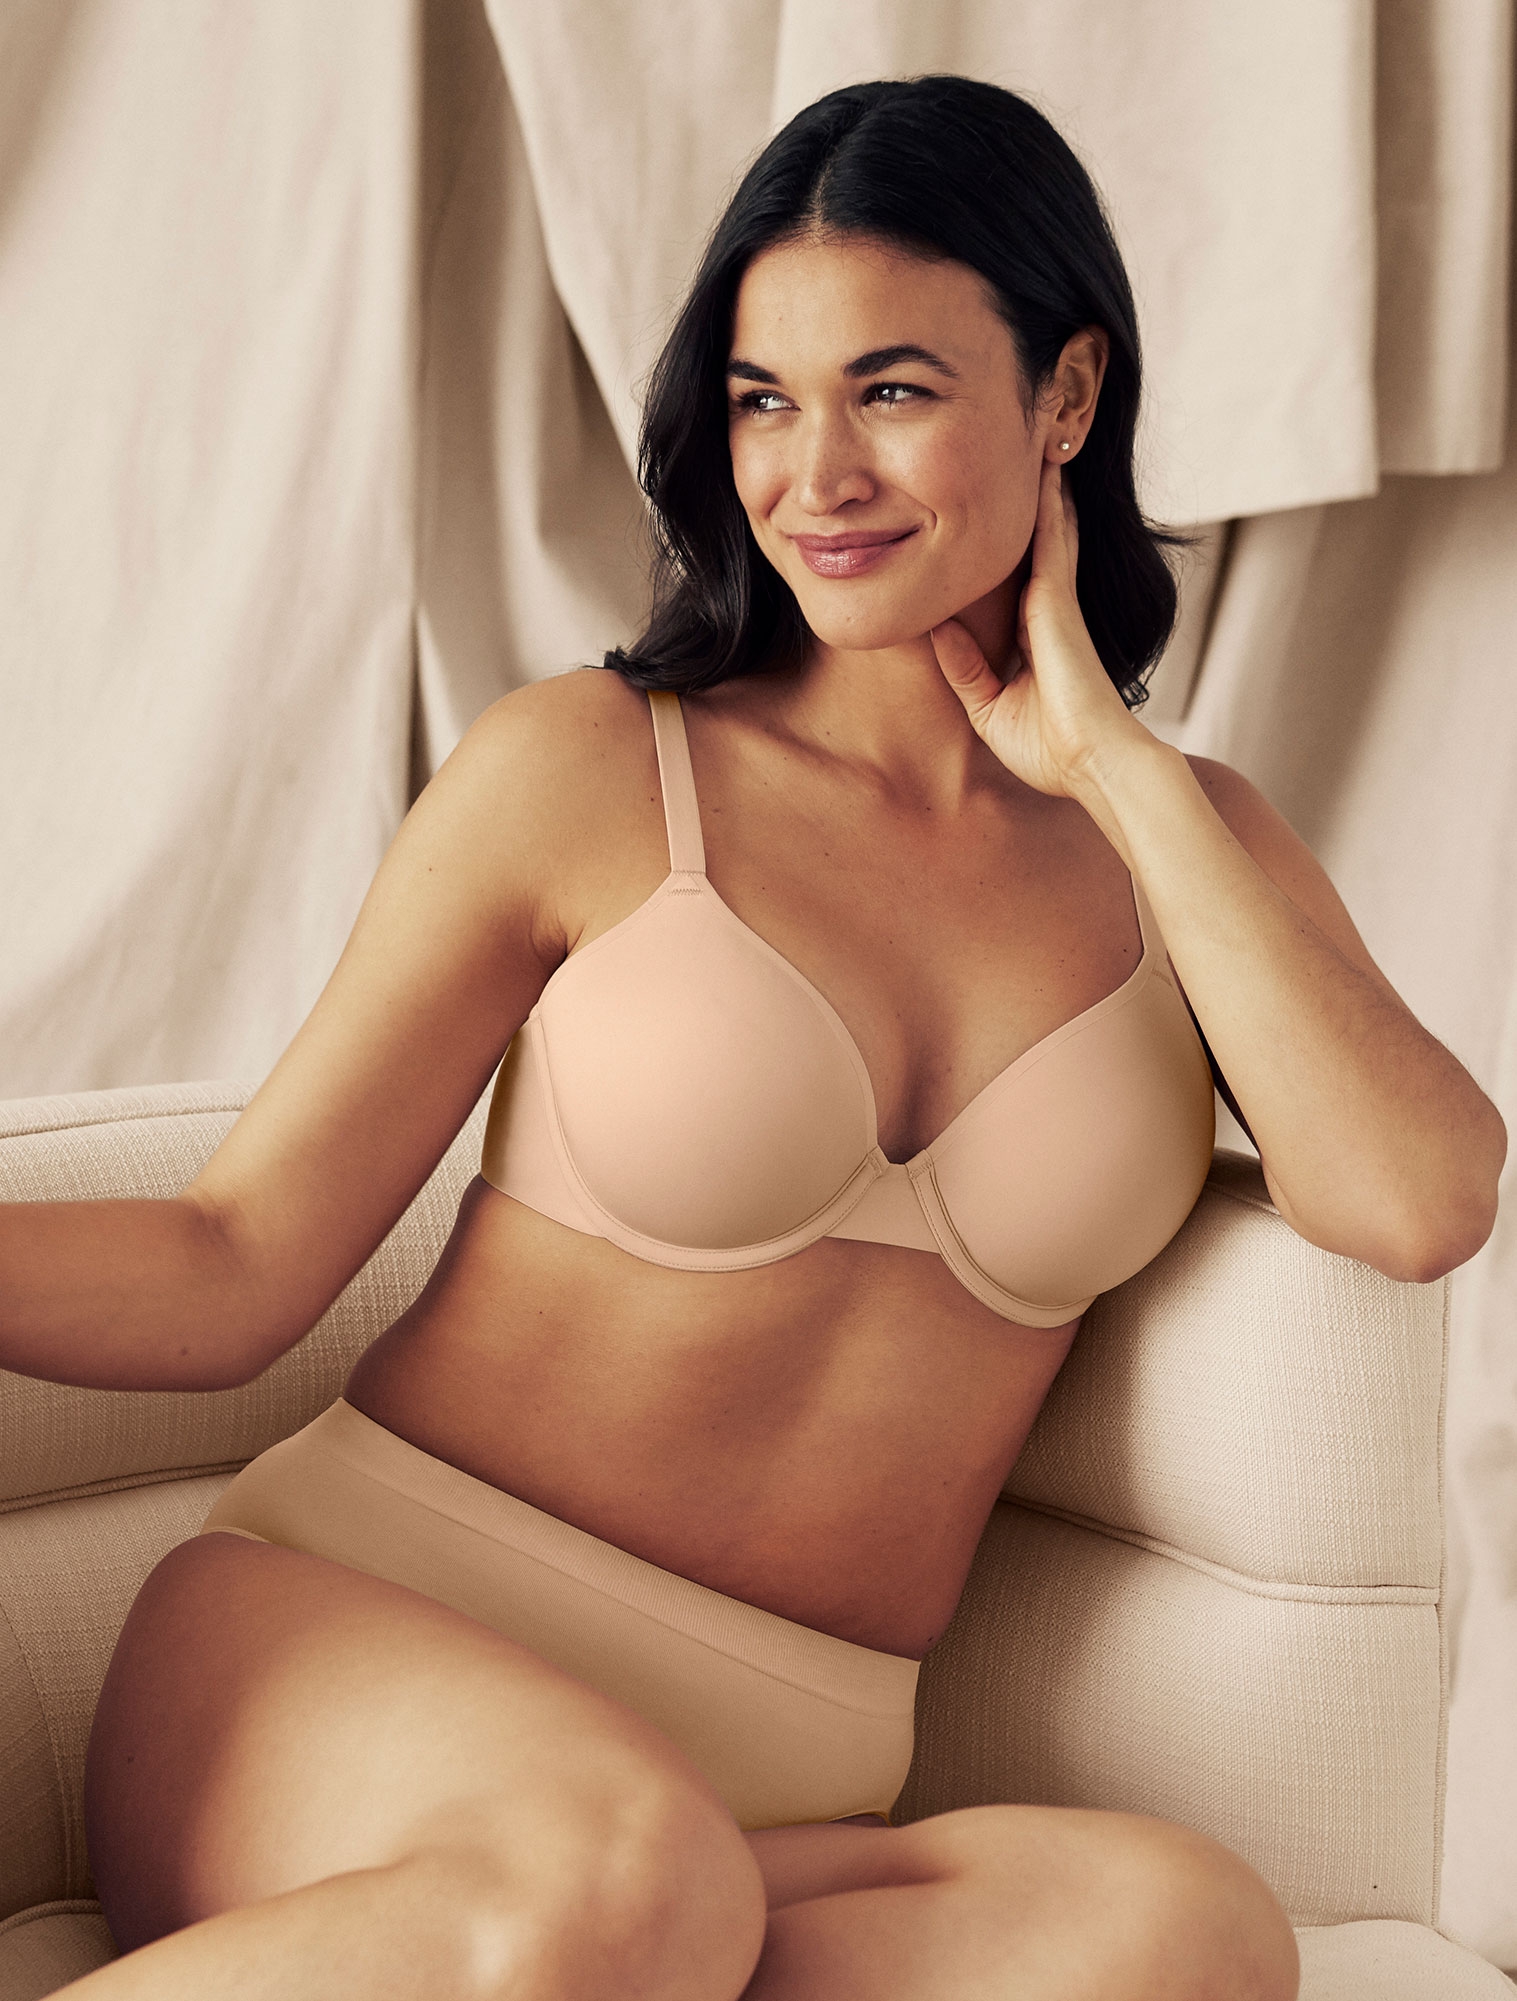 Wacoal At Ease Full Figure Underwire Bra